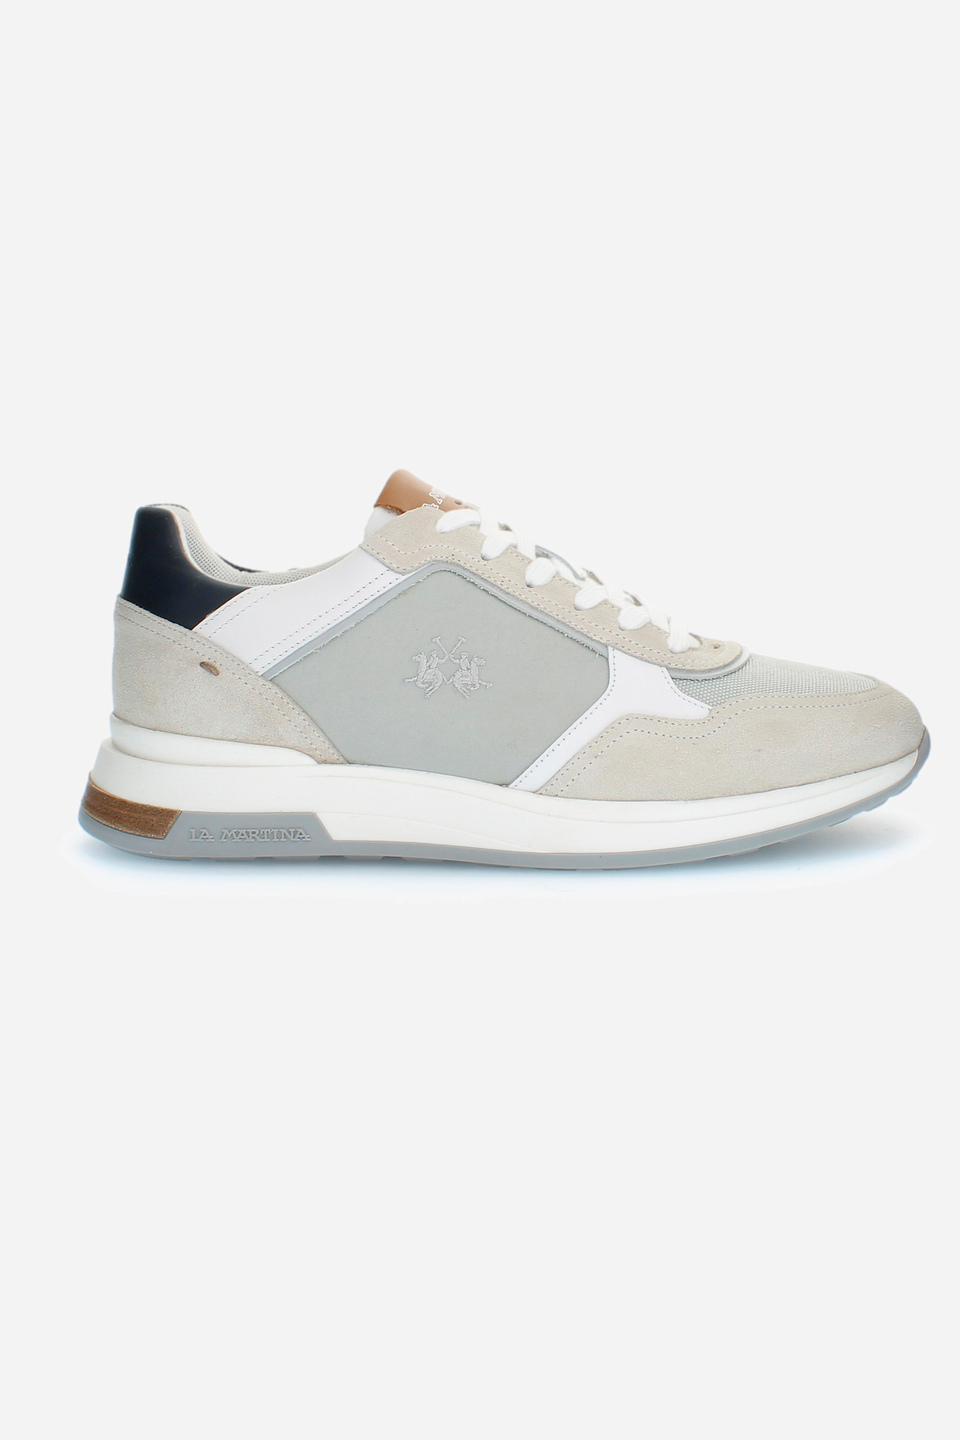 Men's trainers with raised sole in canvas and suede | La Martina - Official Online Shop